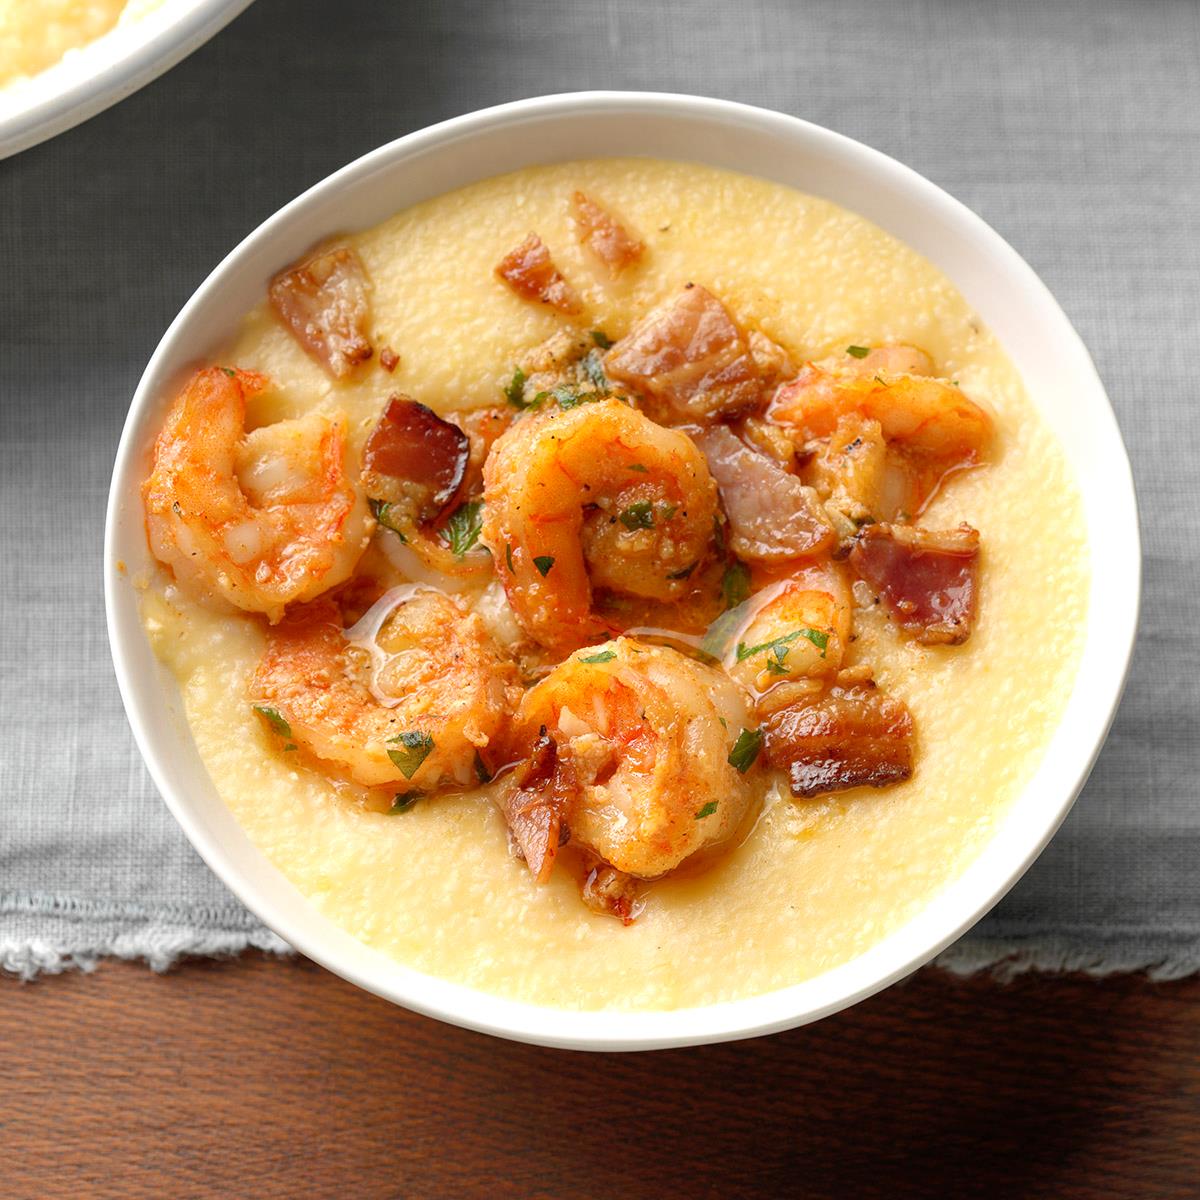 biscuit love shrimp and grits recipe